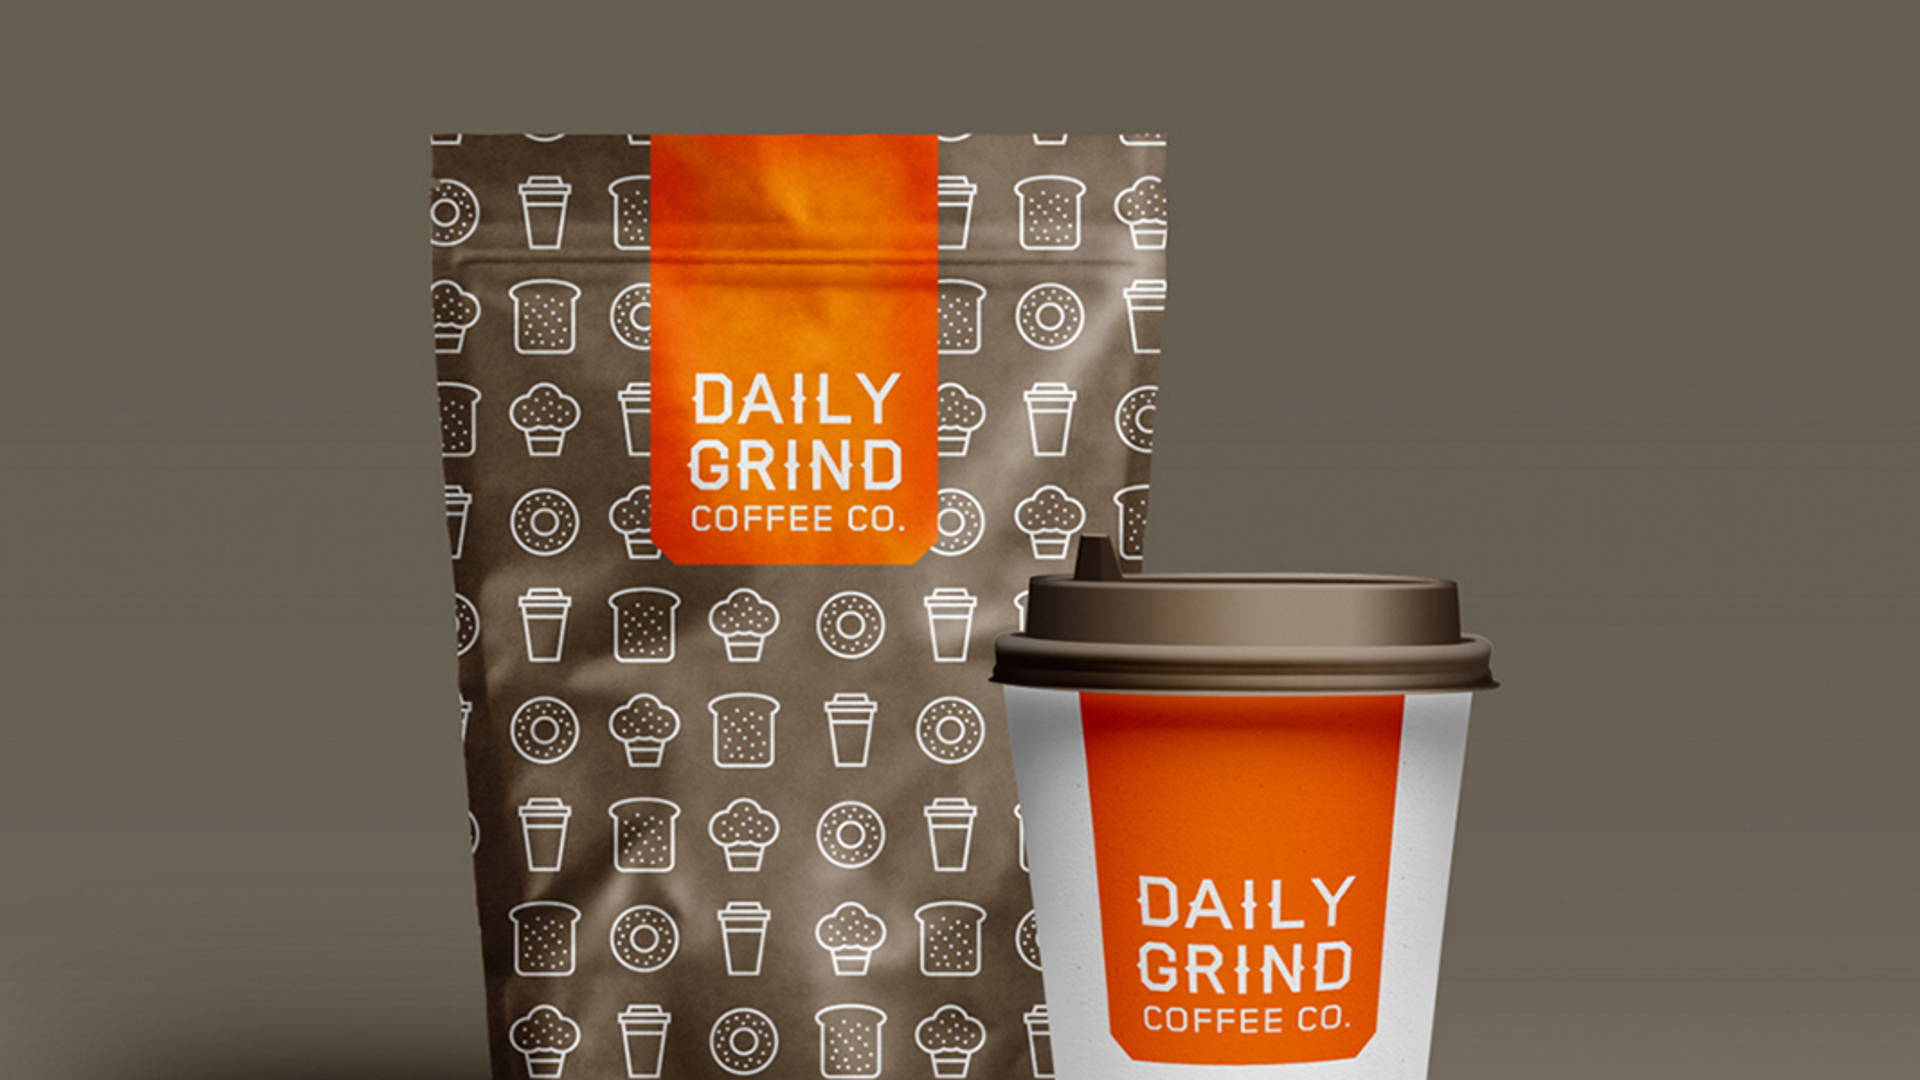 Featured image for Daily Grind Coffee Co.